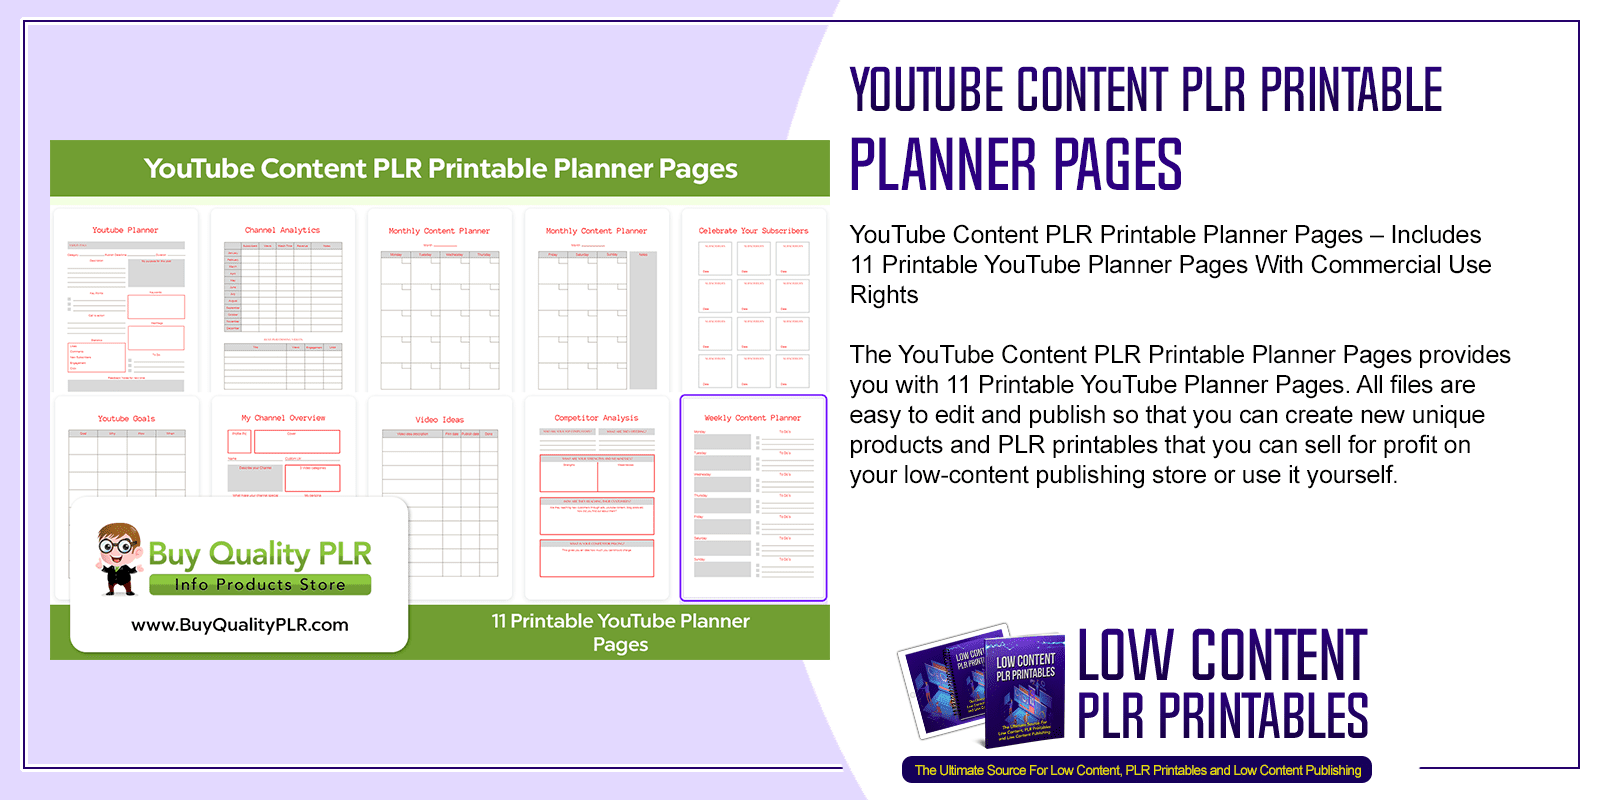 YouTube Content PLR Printable Planner Pages